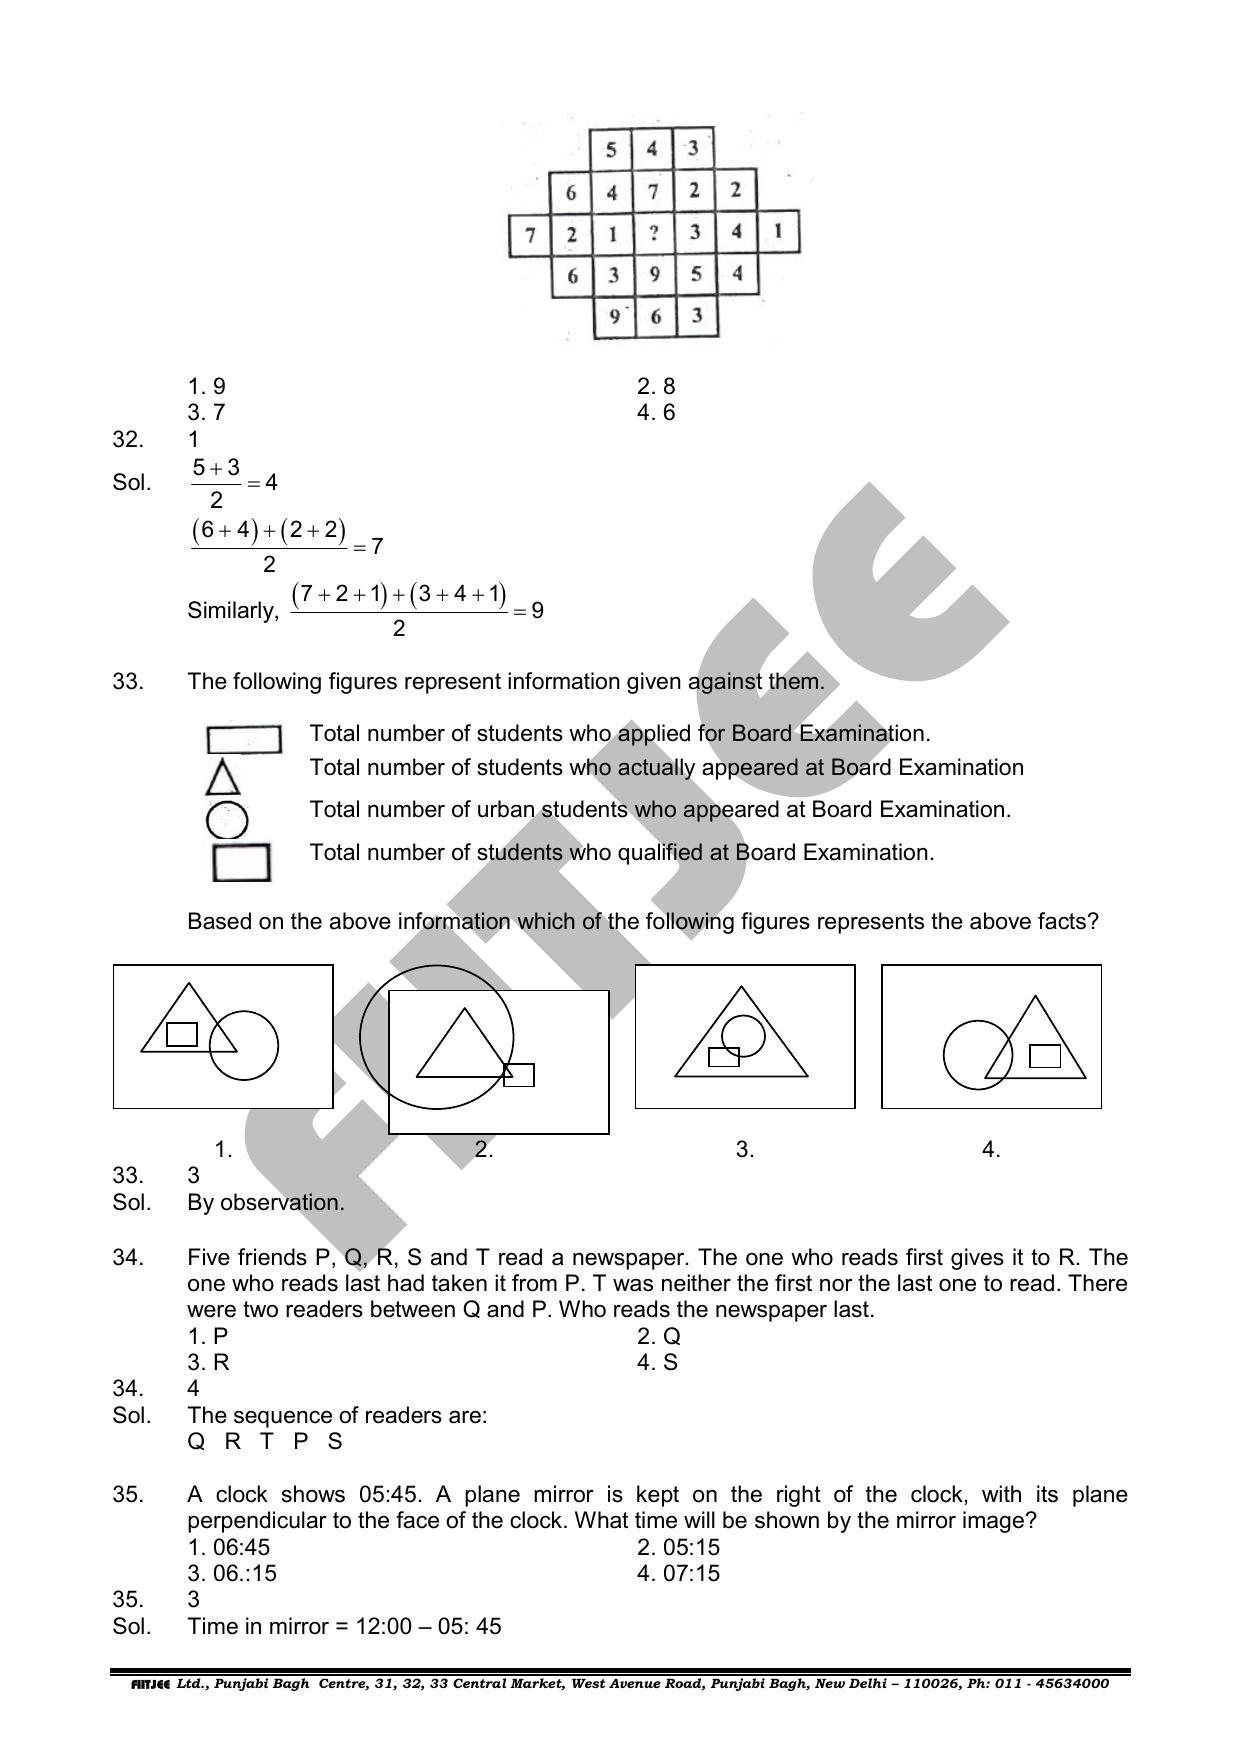 NTSE 2019 (Stage II) MAT Question Paper with Solution (June 16, 2019) - Page 12